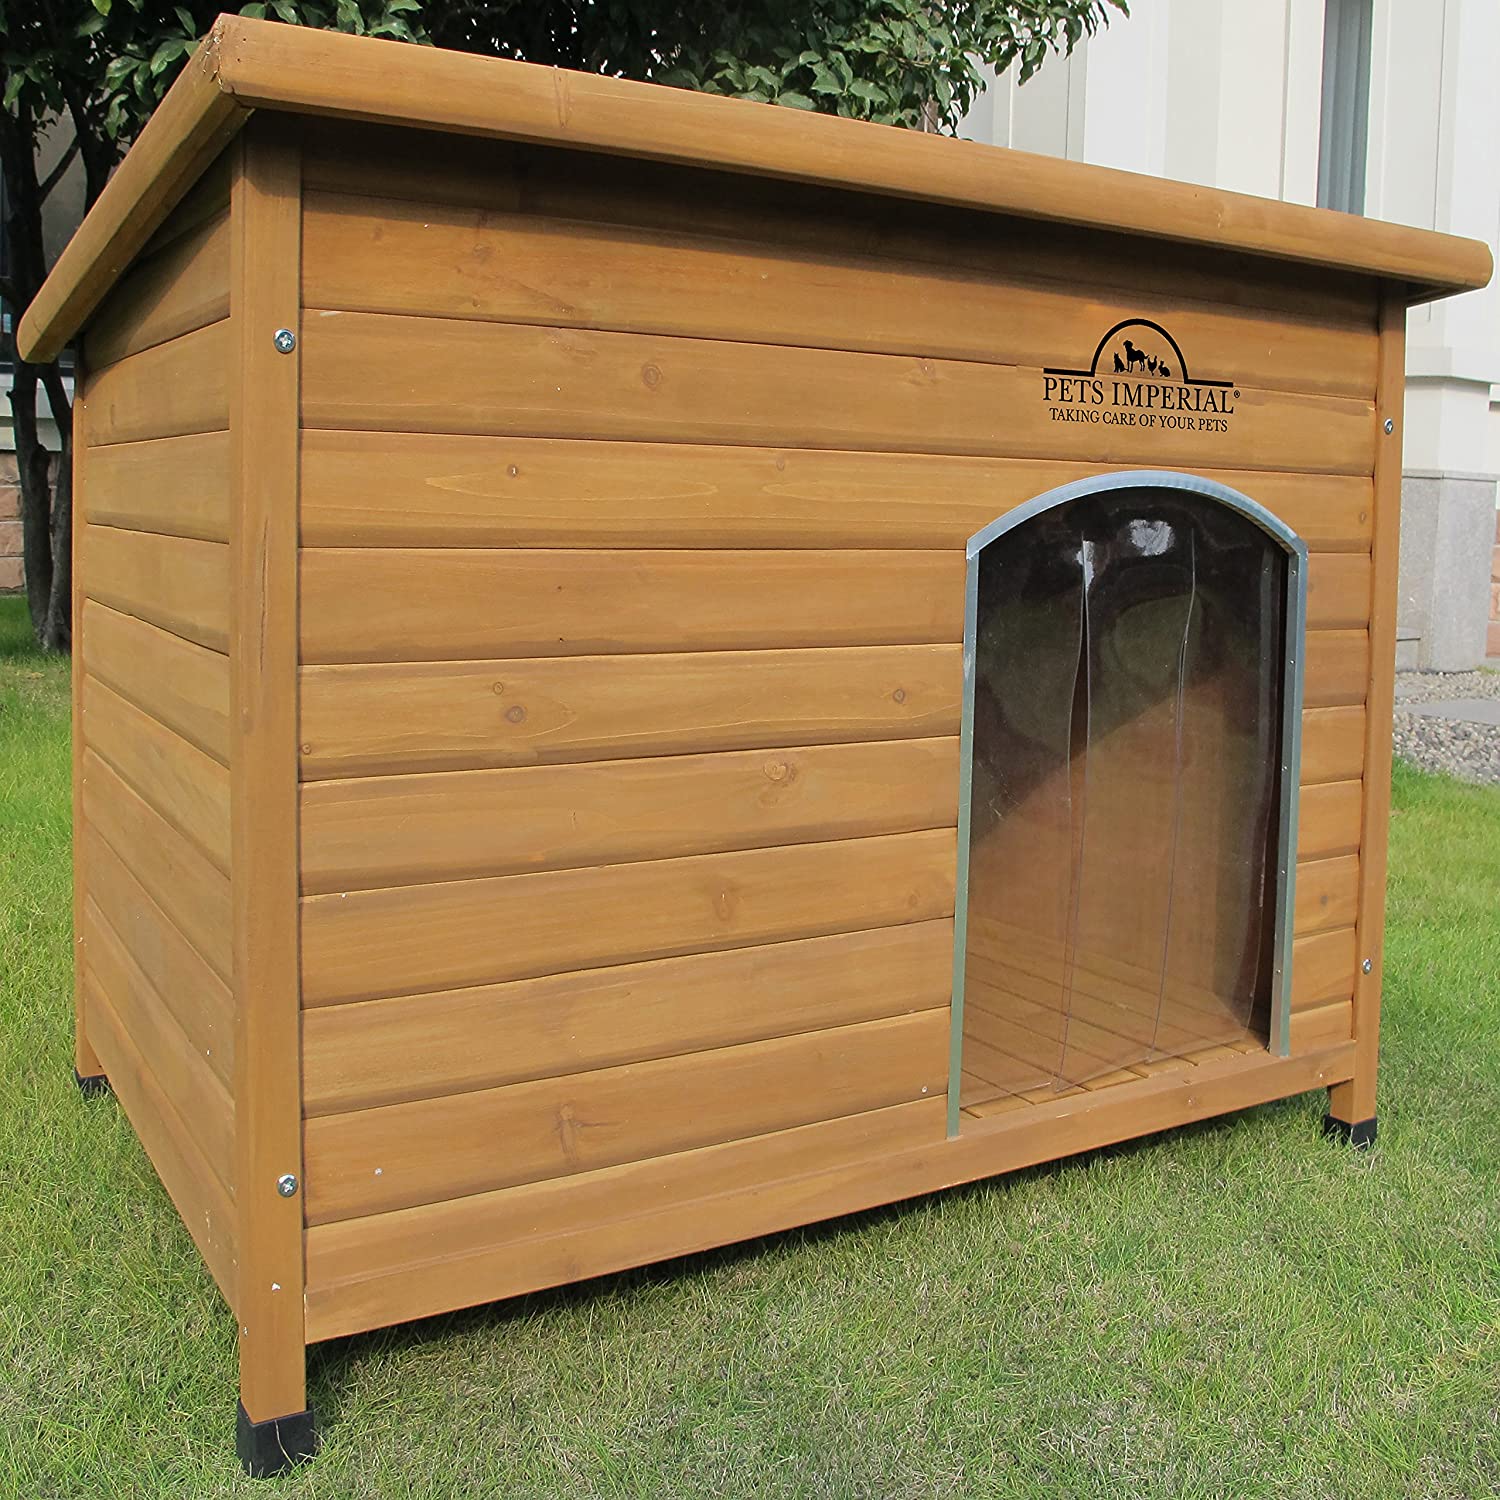 PetsImperial Insulated Wooden Dog House 